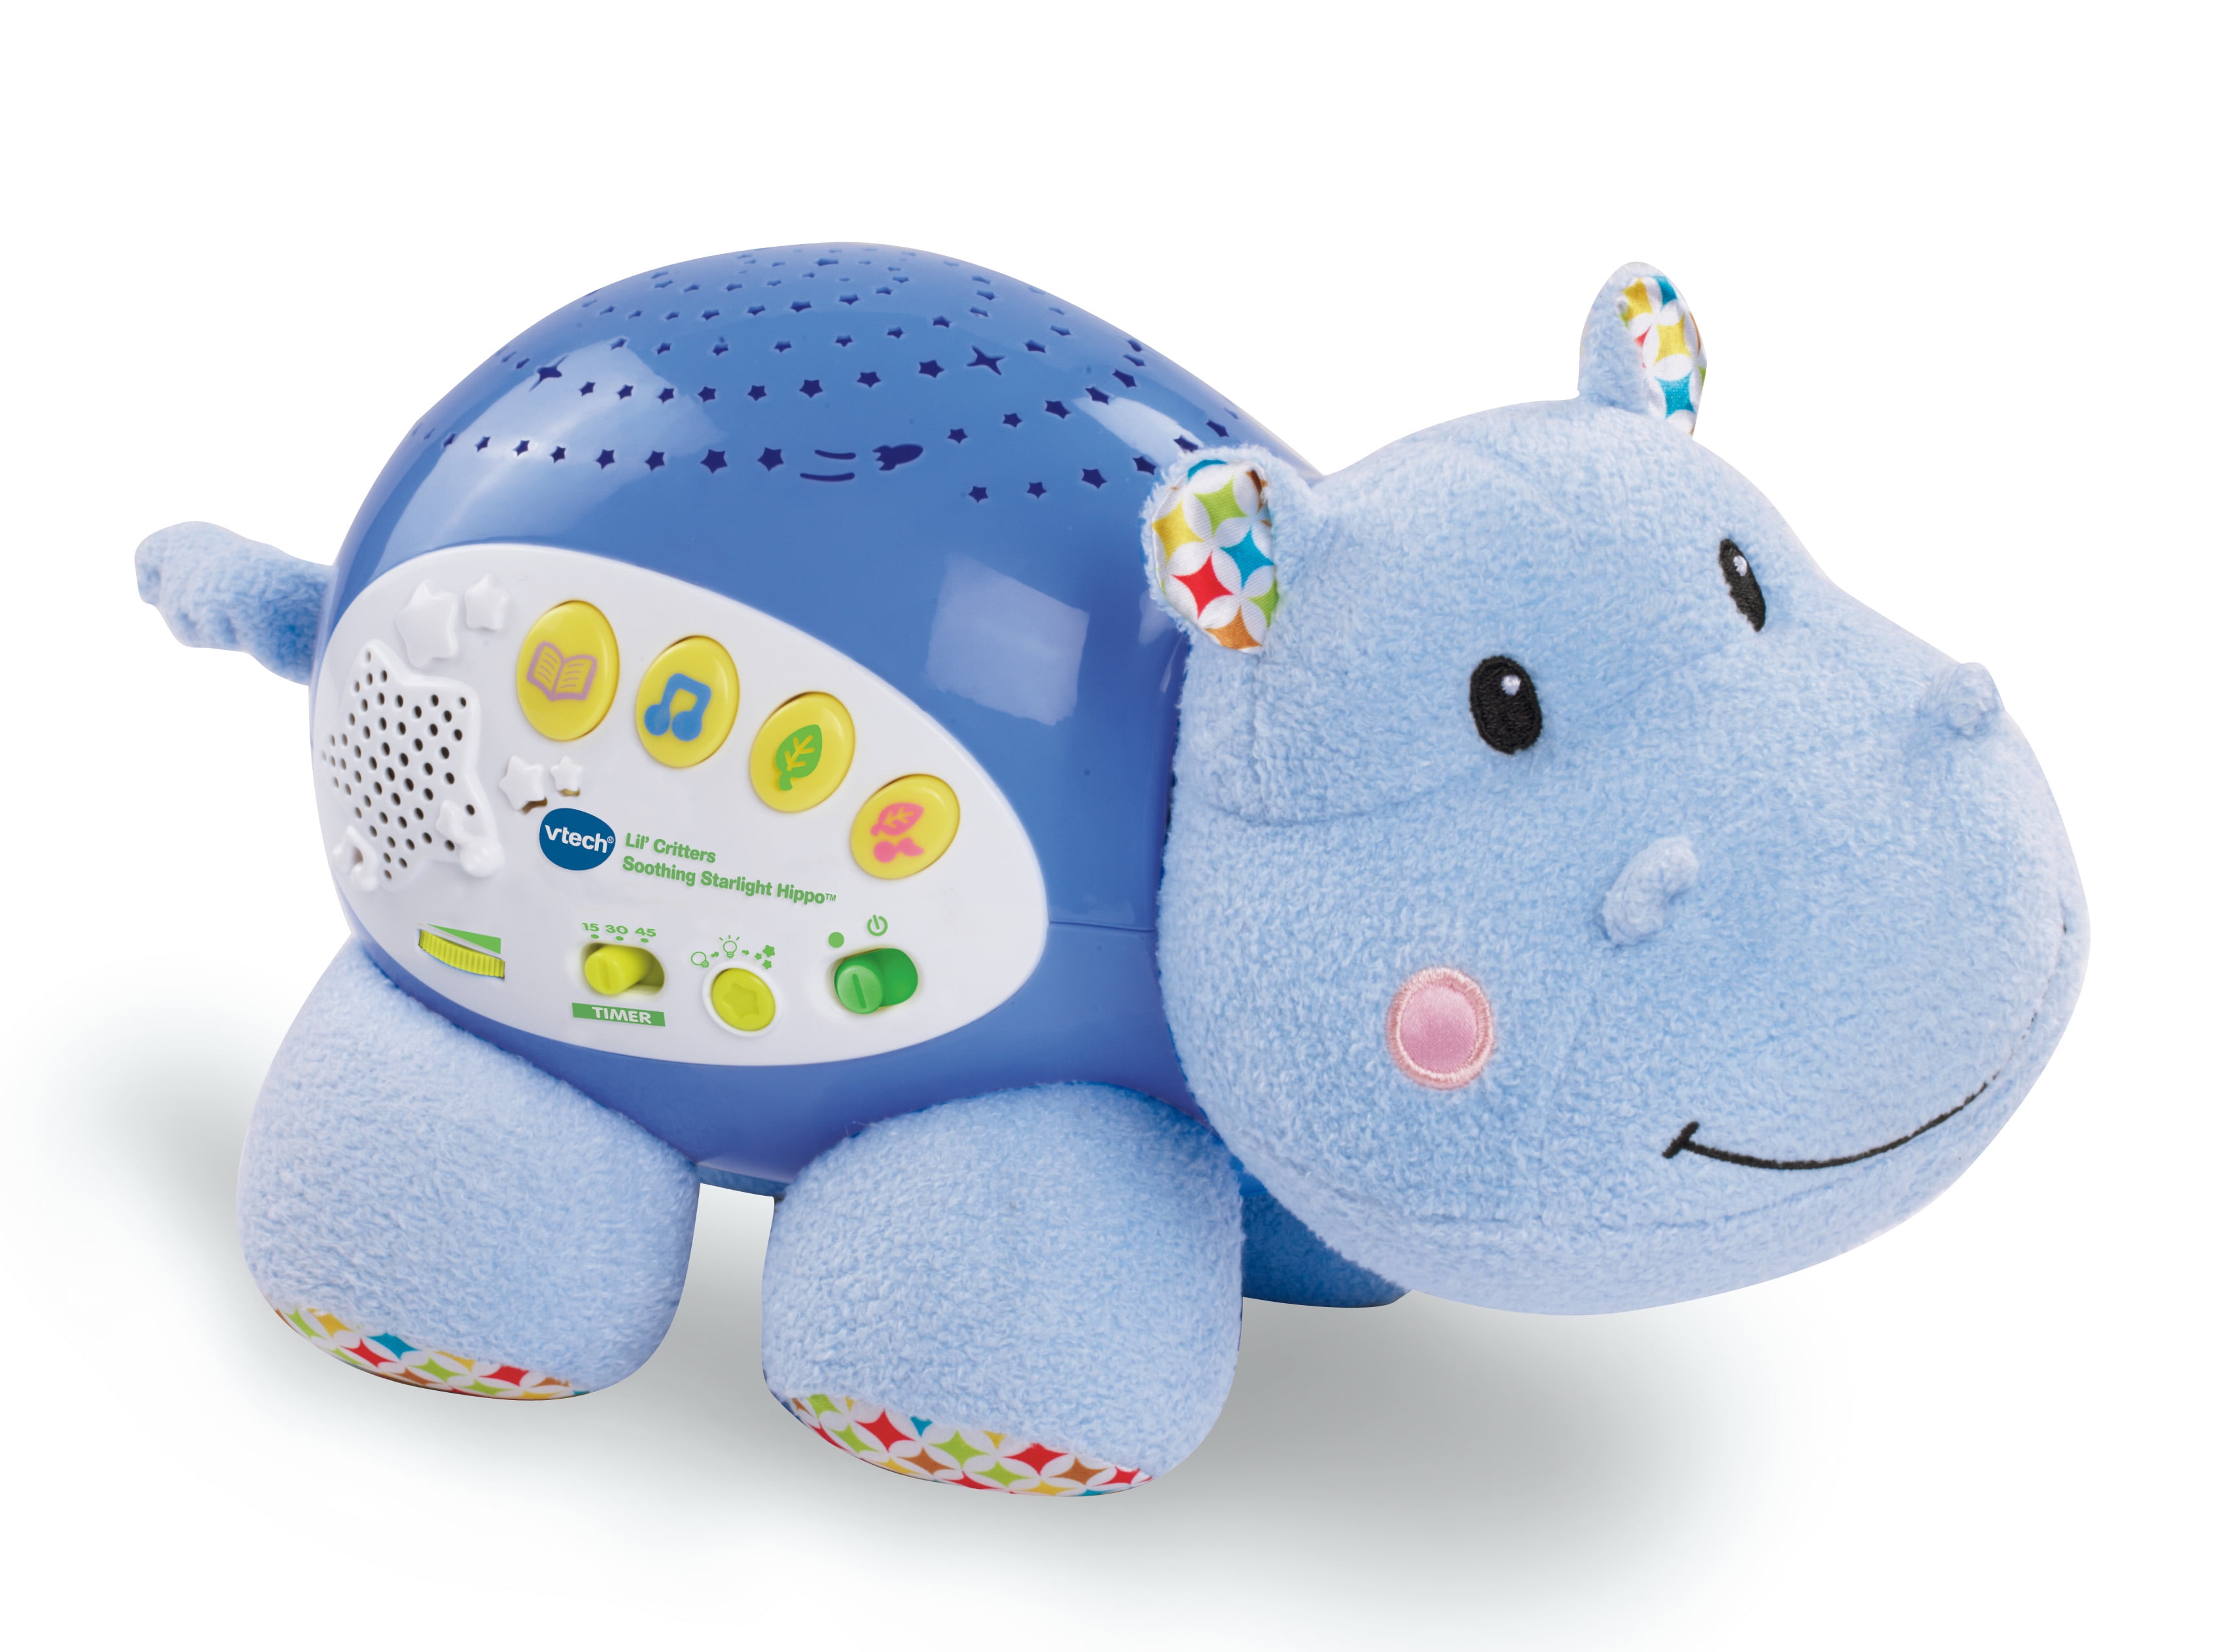 VTech Lil' Critters Soothing Starlight Hippo, Plush Baby Crib Toy